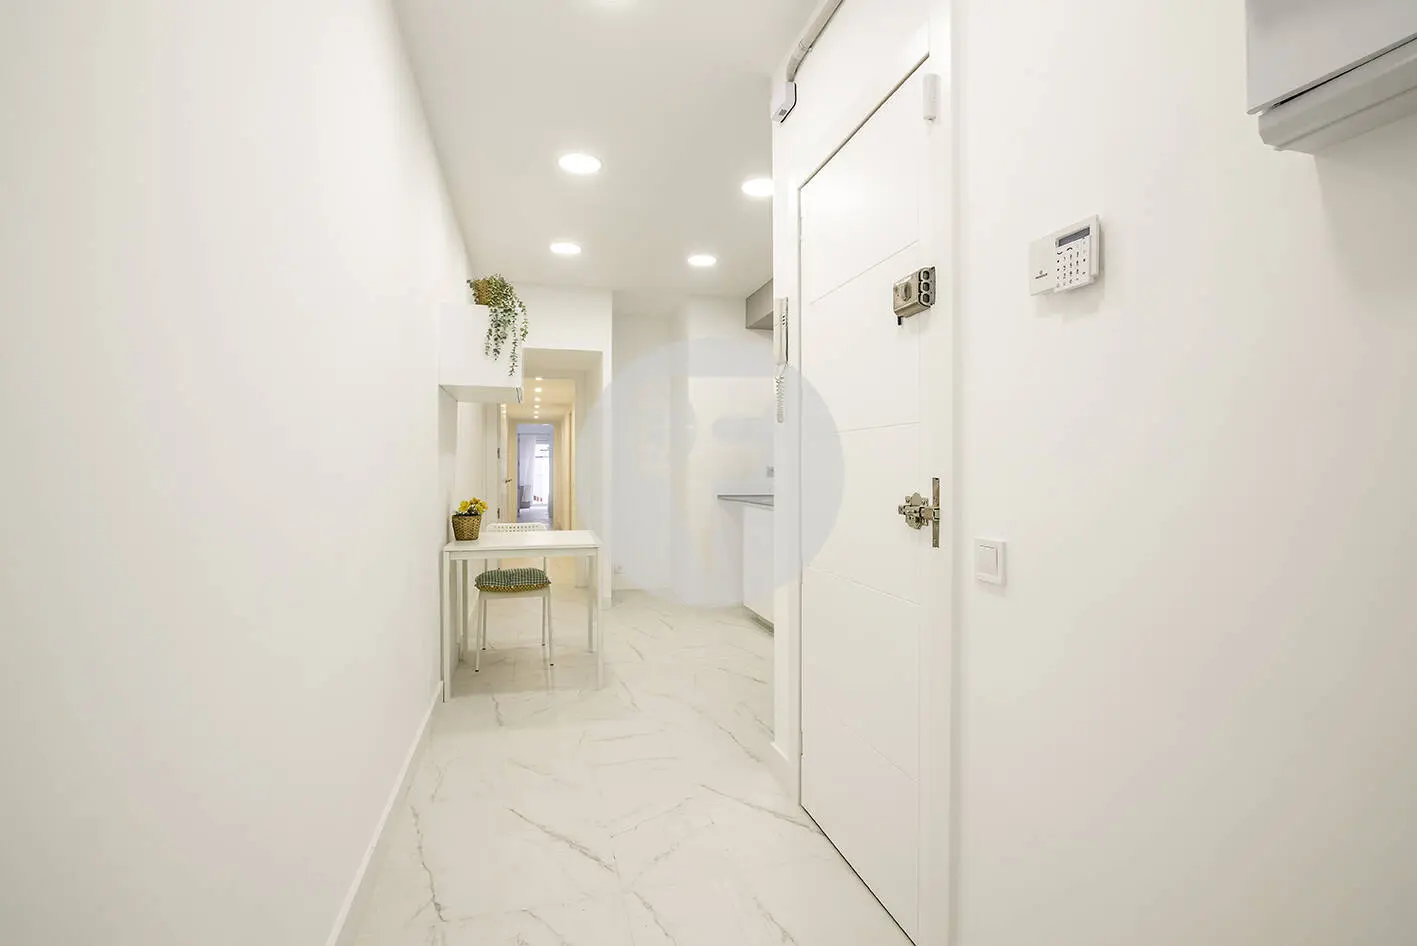 Brand new completely renovated apartment on Aragó street in the heart of El Clot in Barcelona. 13